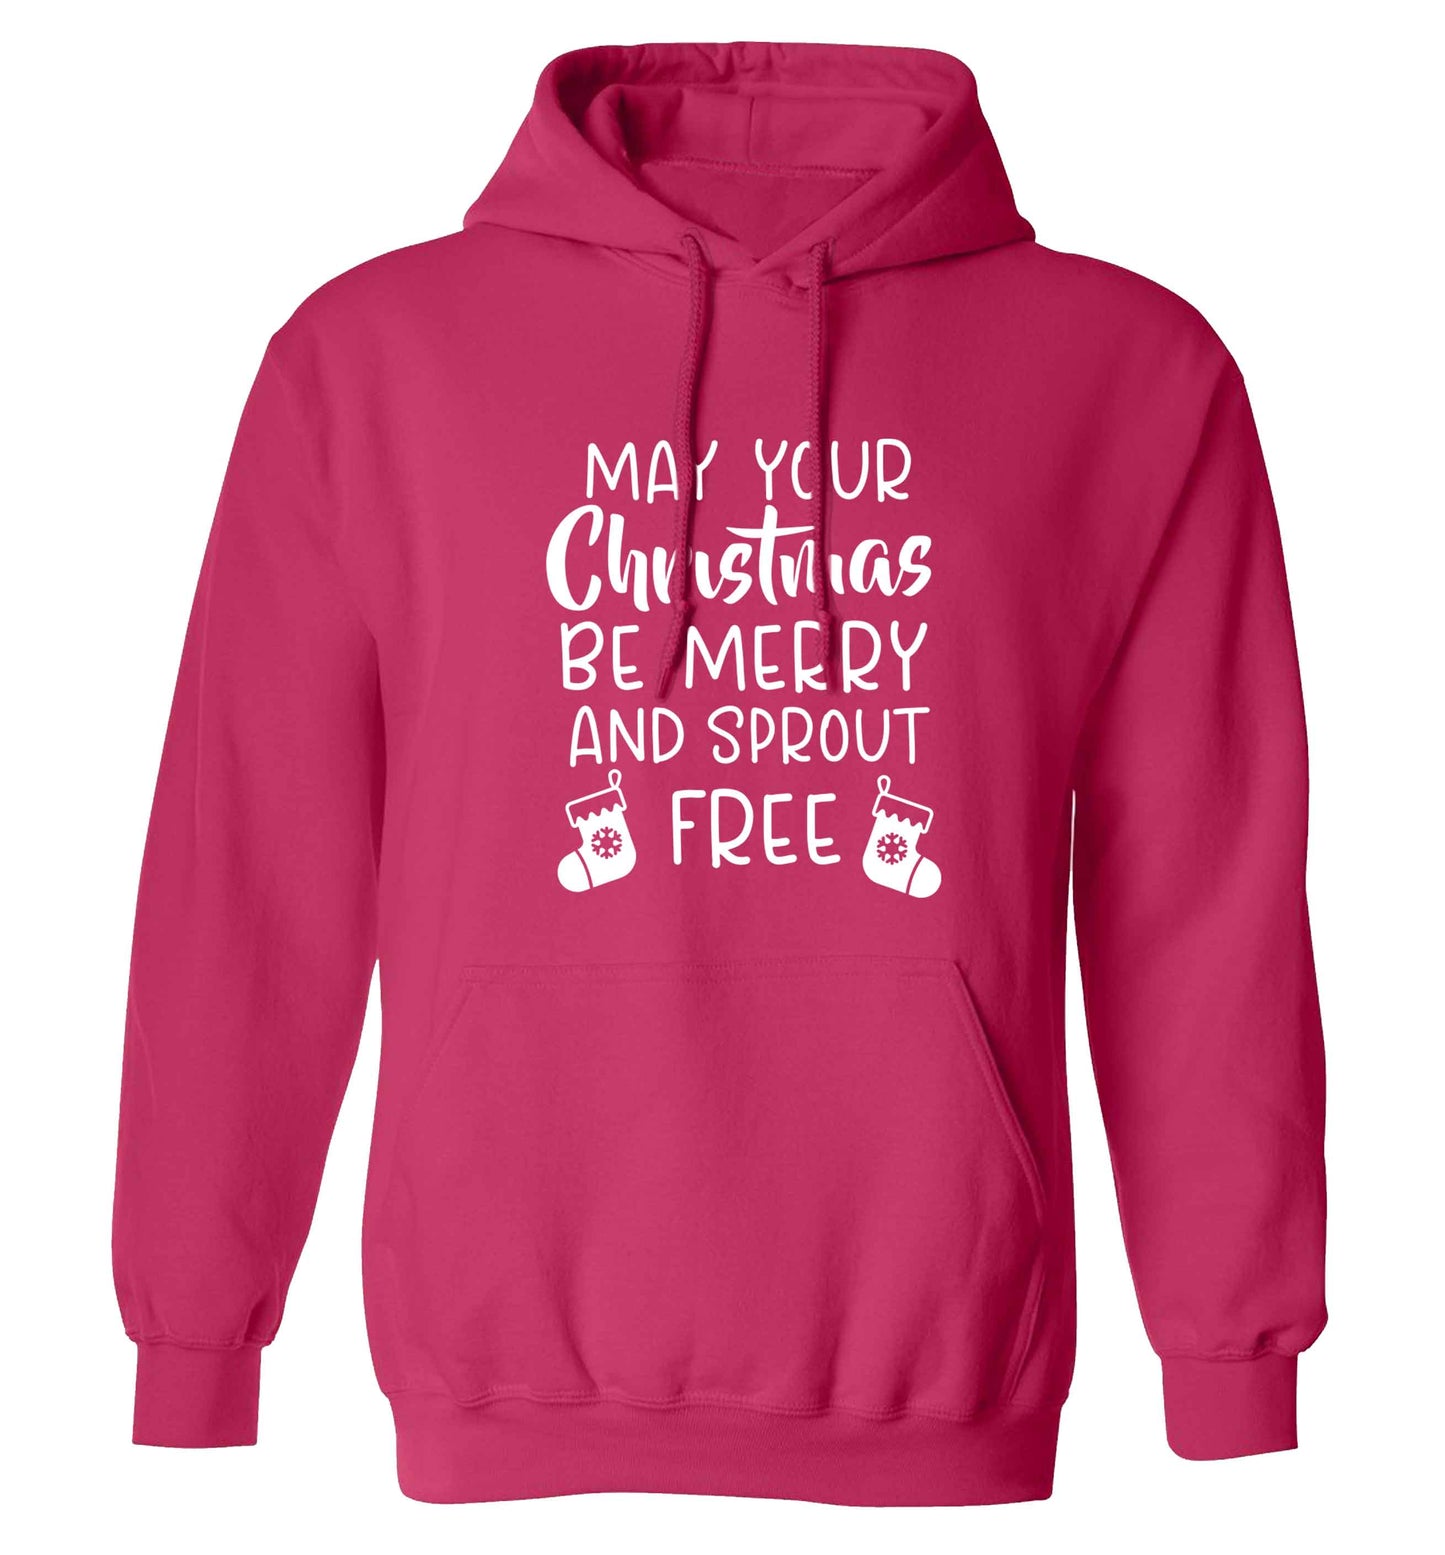 May your Christmas be merry and sprout free adults unisex pink hoodie 2XL